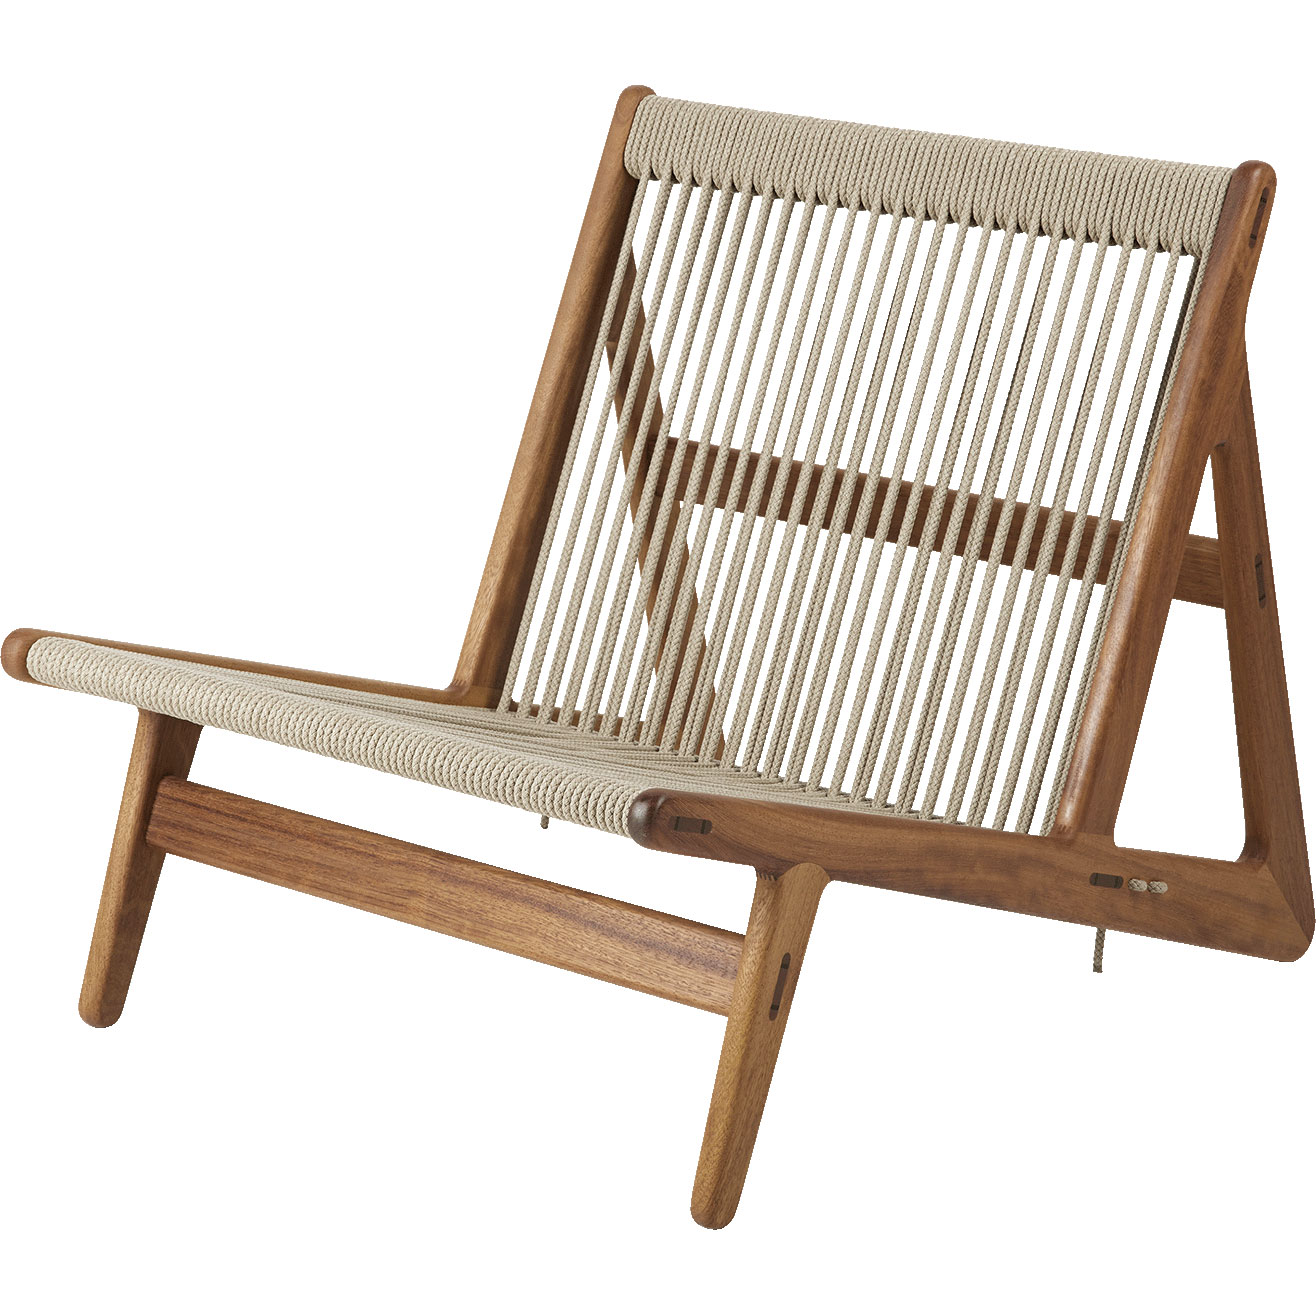 MR01 Initial Lounge Chair Outdoor